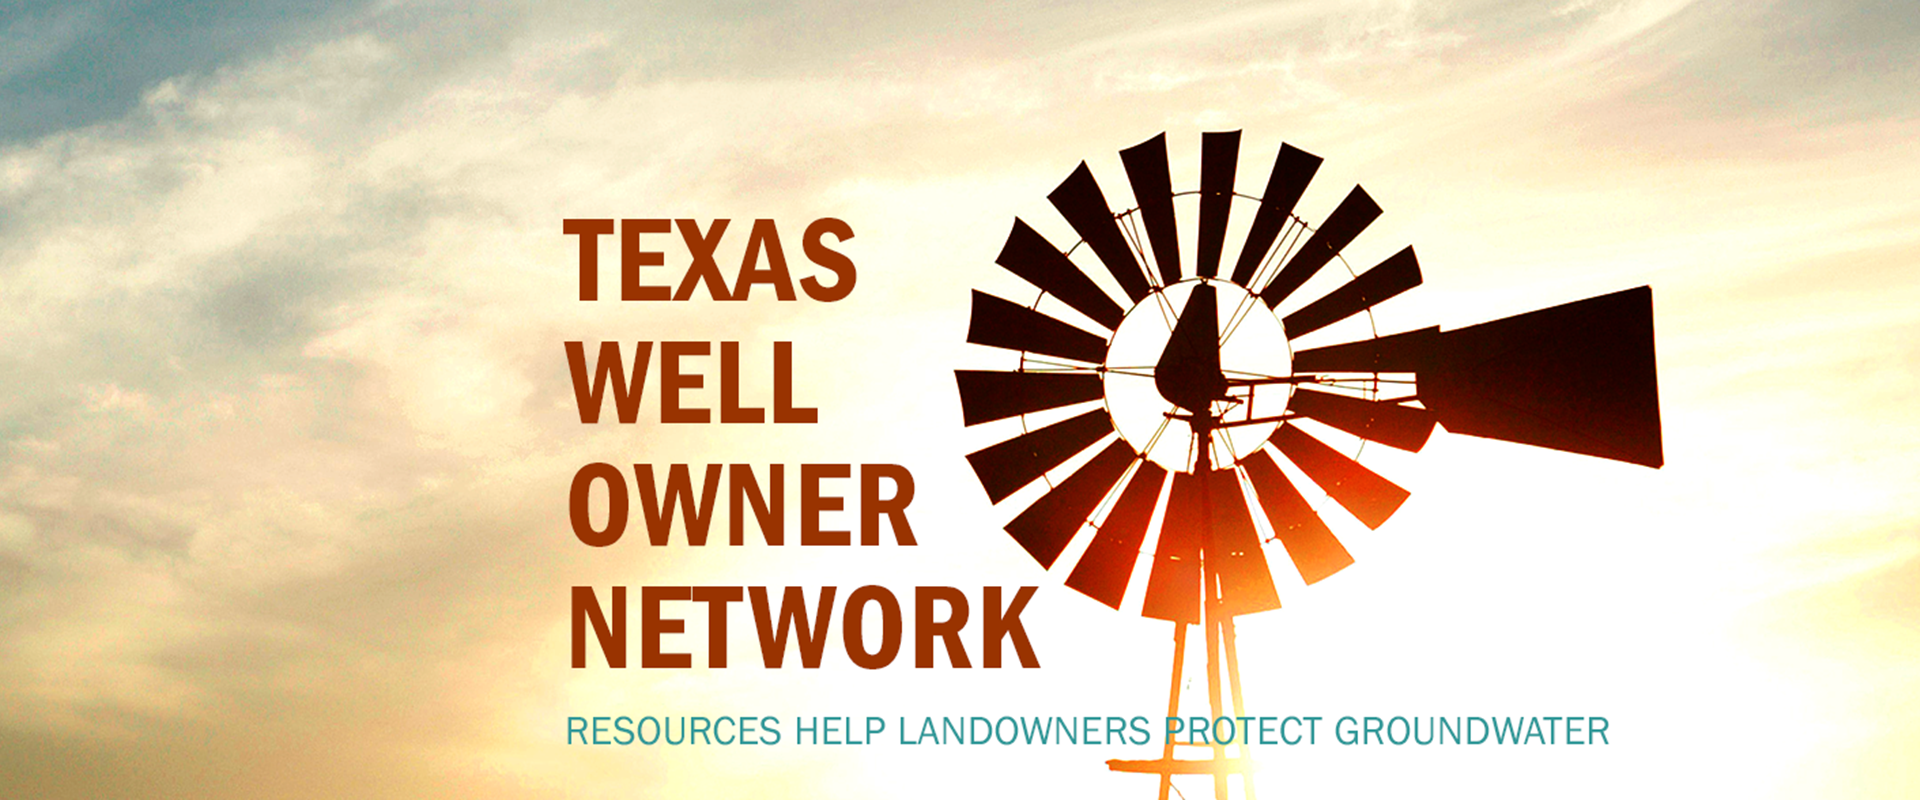 Texas Well Owner Network